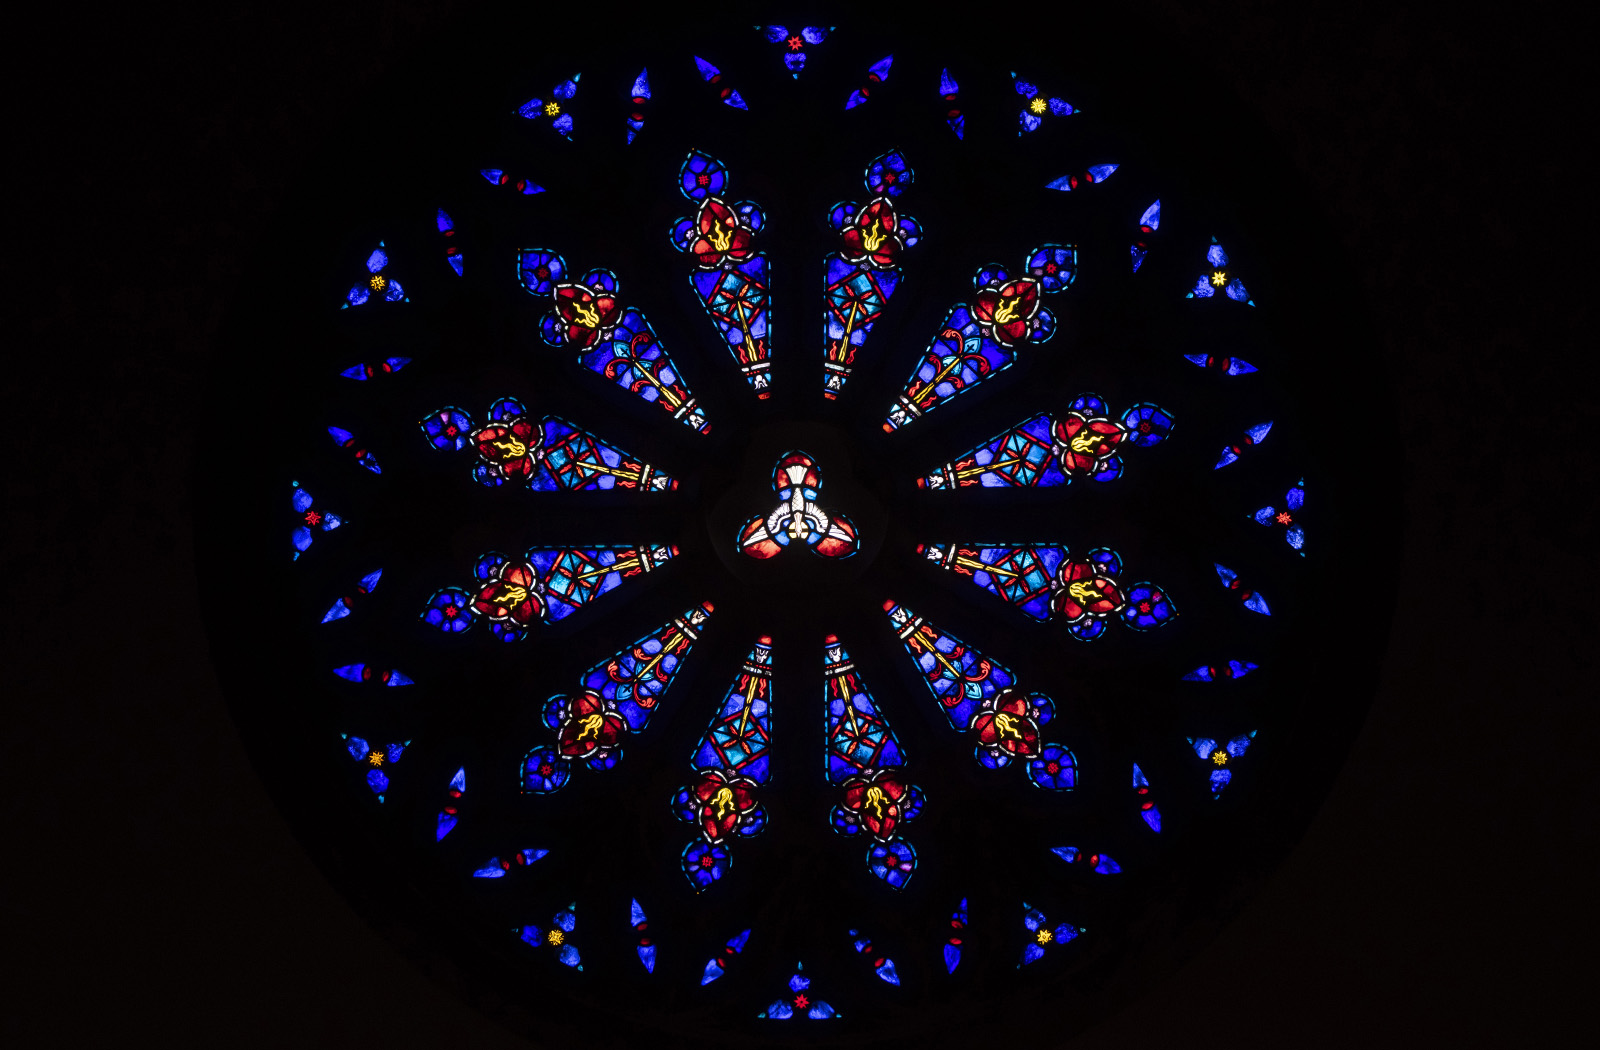 Detail photo of a colorful stained glass panel called the Rose Window